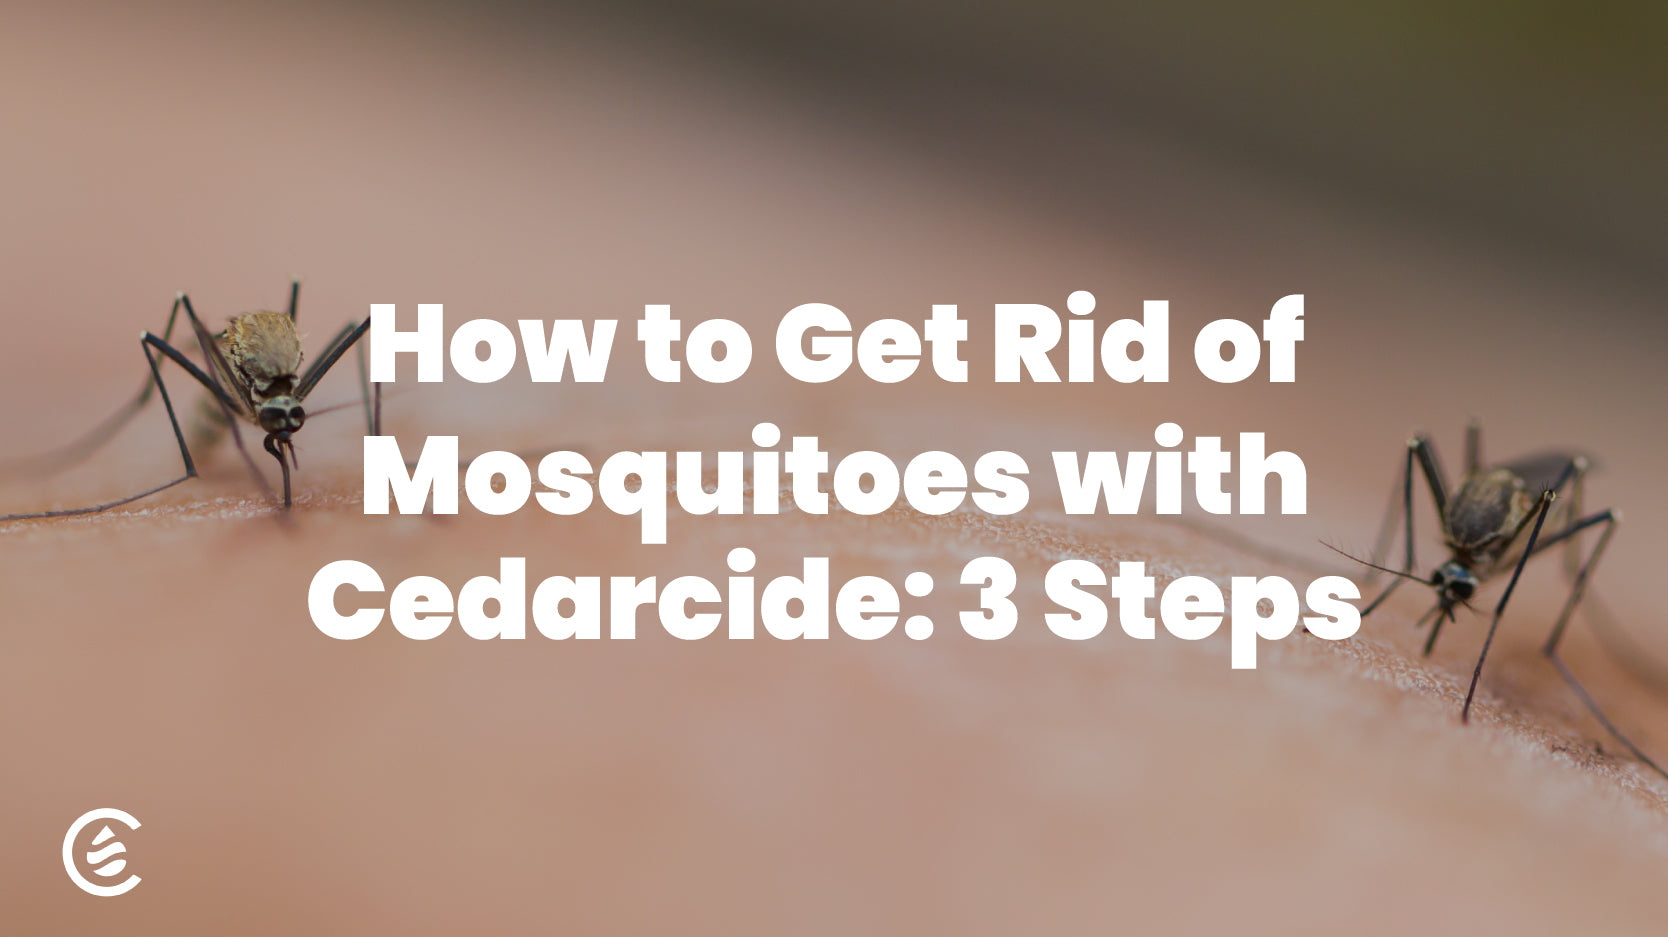 Cedarcide Blog Post Image, How to Get Rid of Mosquitoes with Cedarcide: 3 Simple Steps